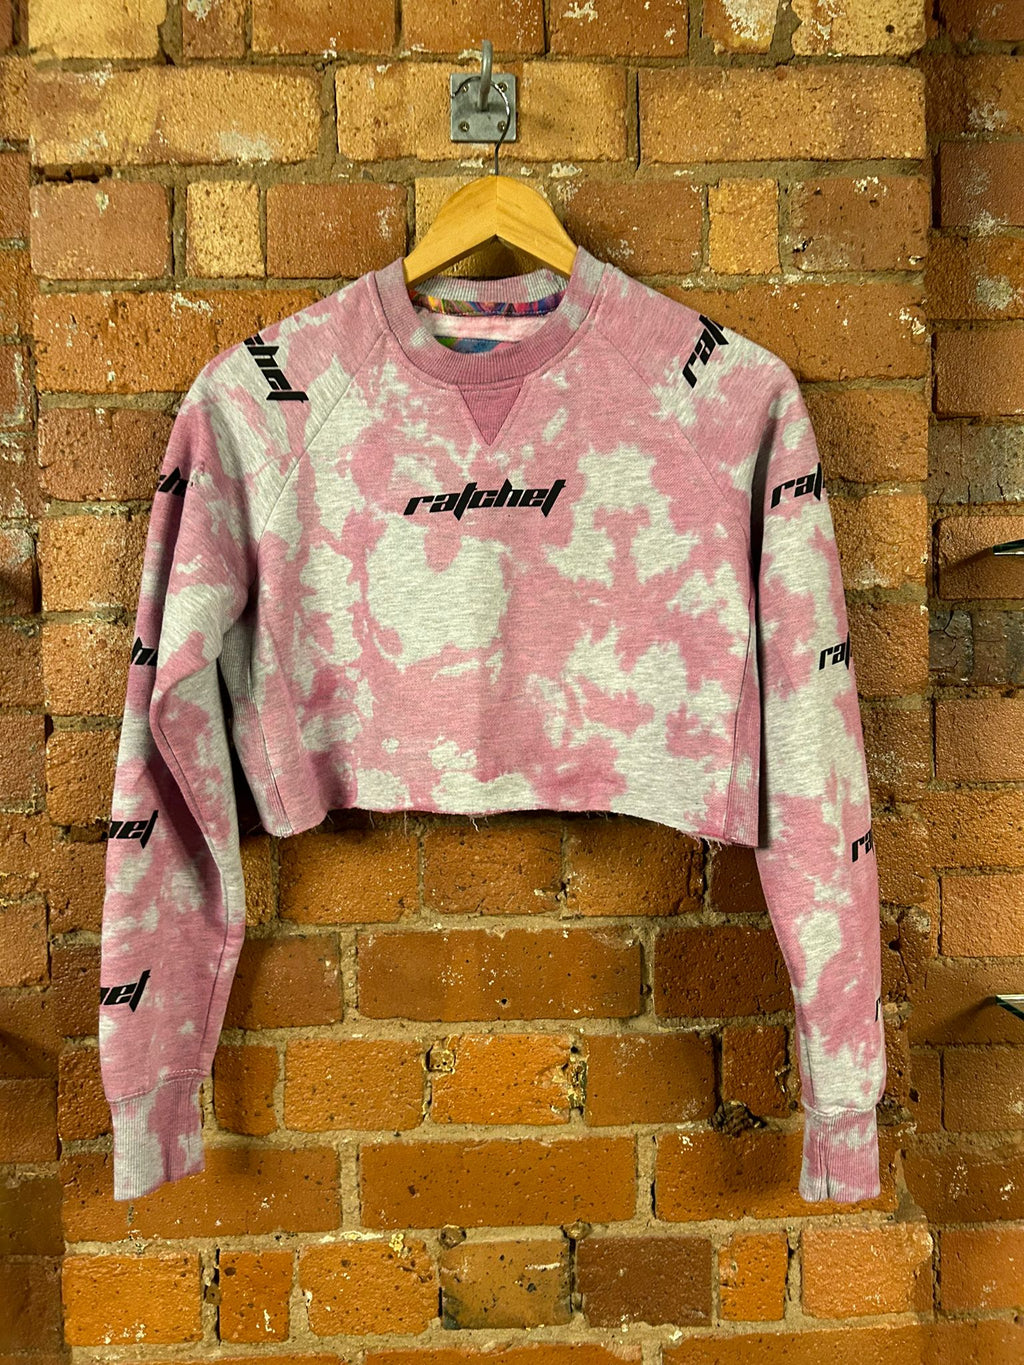 SALE Adult Small pink/Grey Cropped Sweatshirt